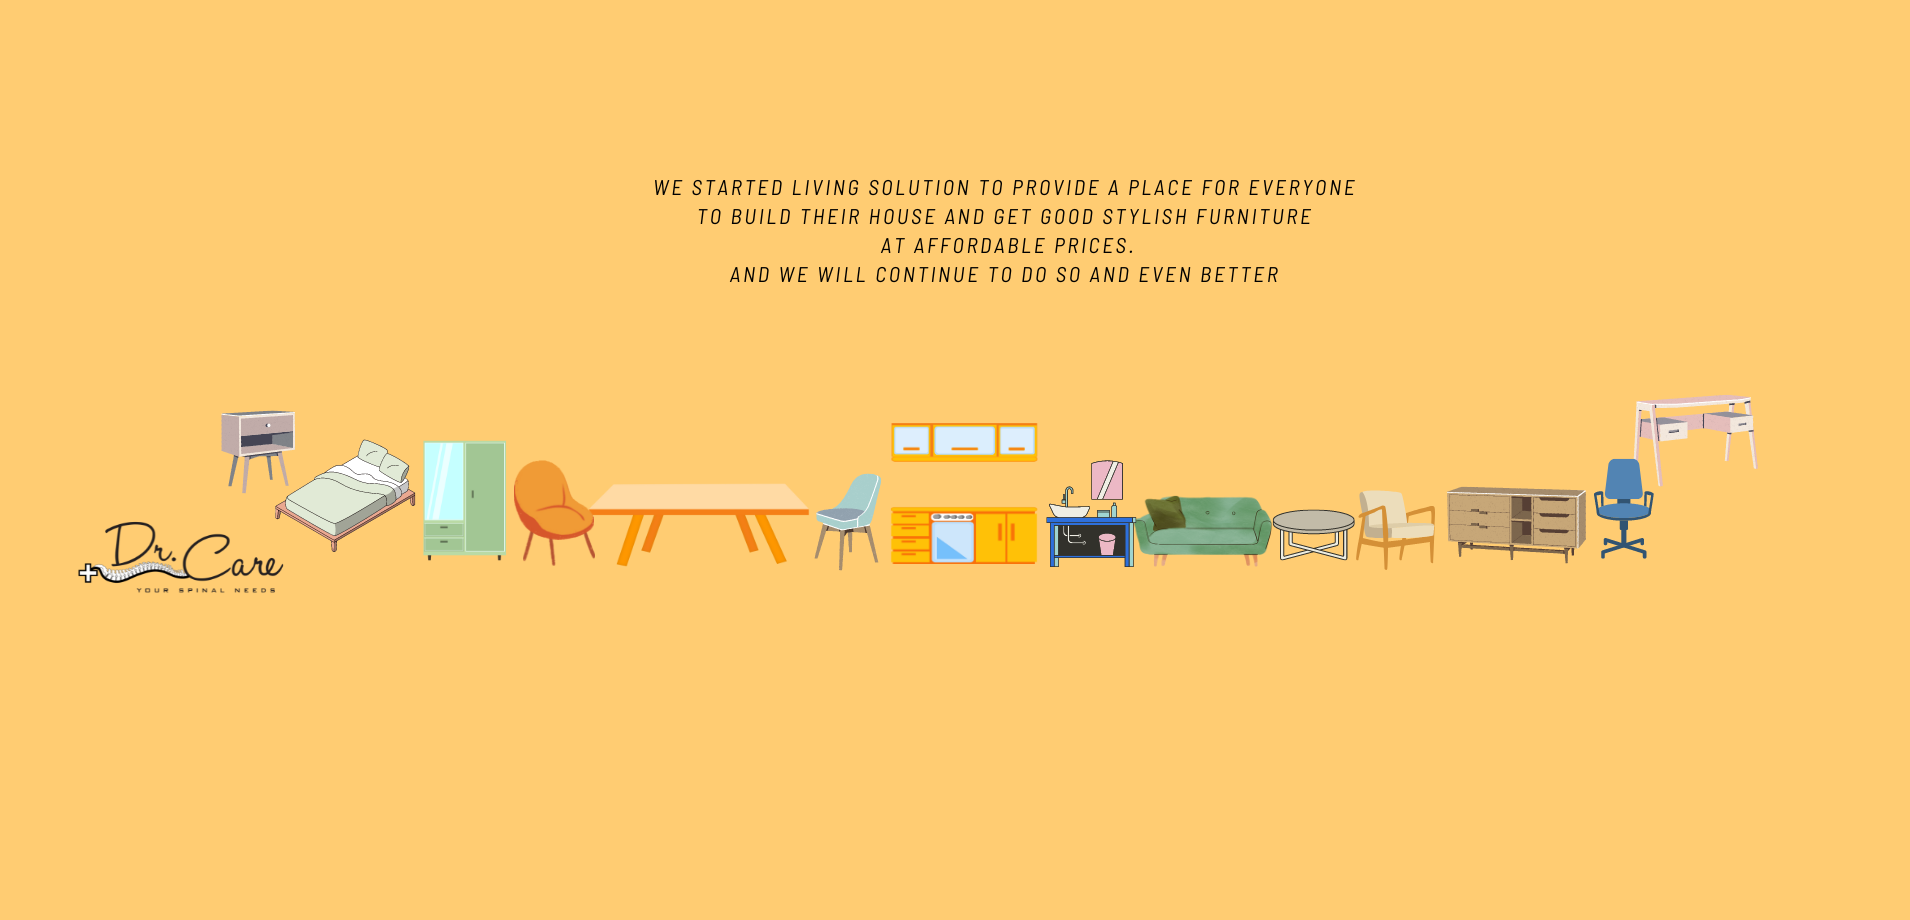 LIVING SOLUTION FURNITURE ABOUT US